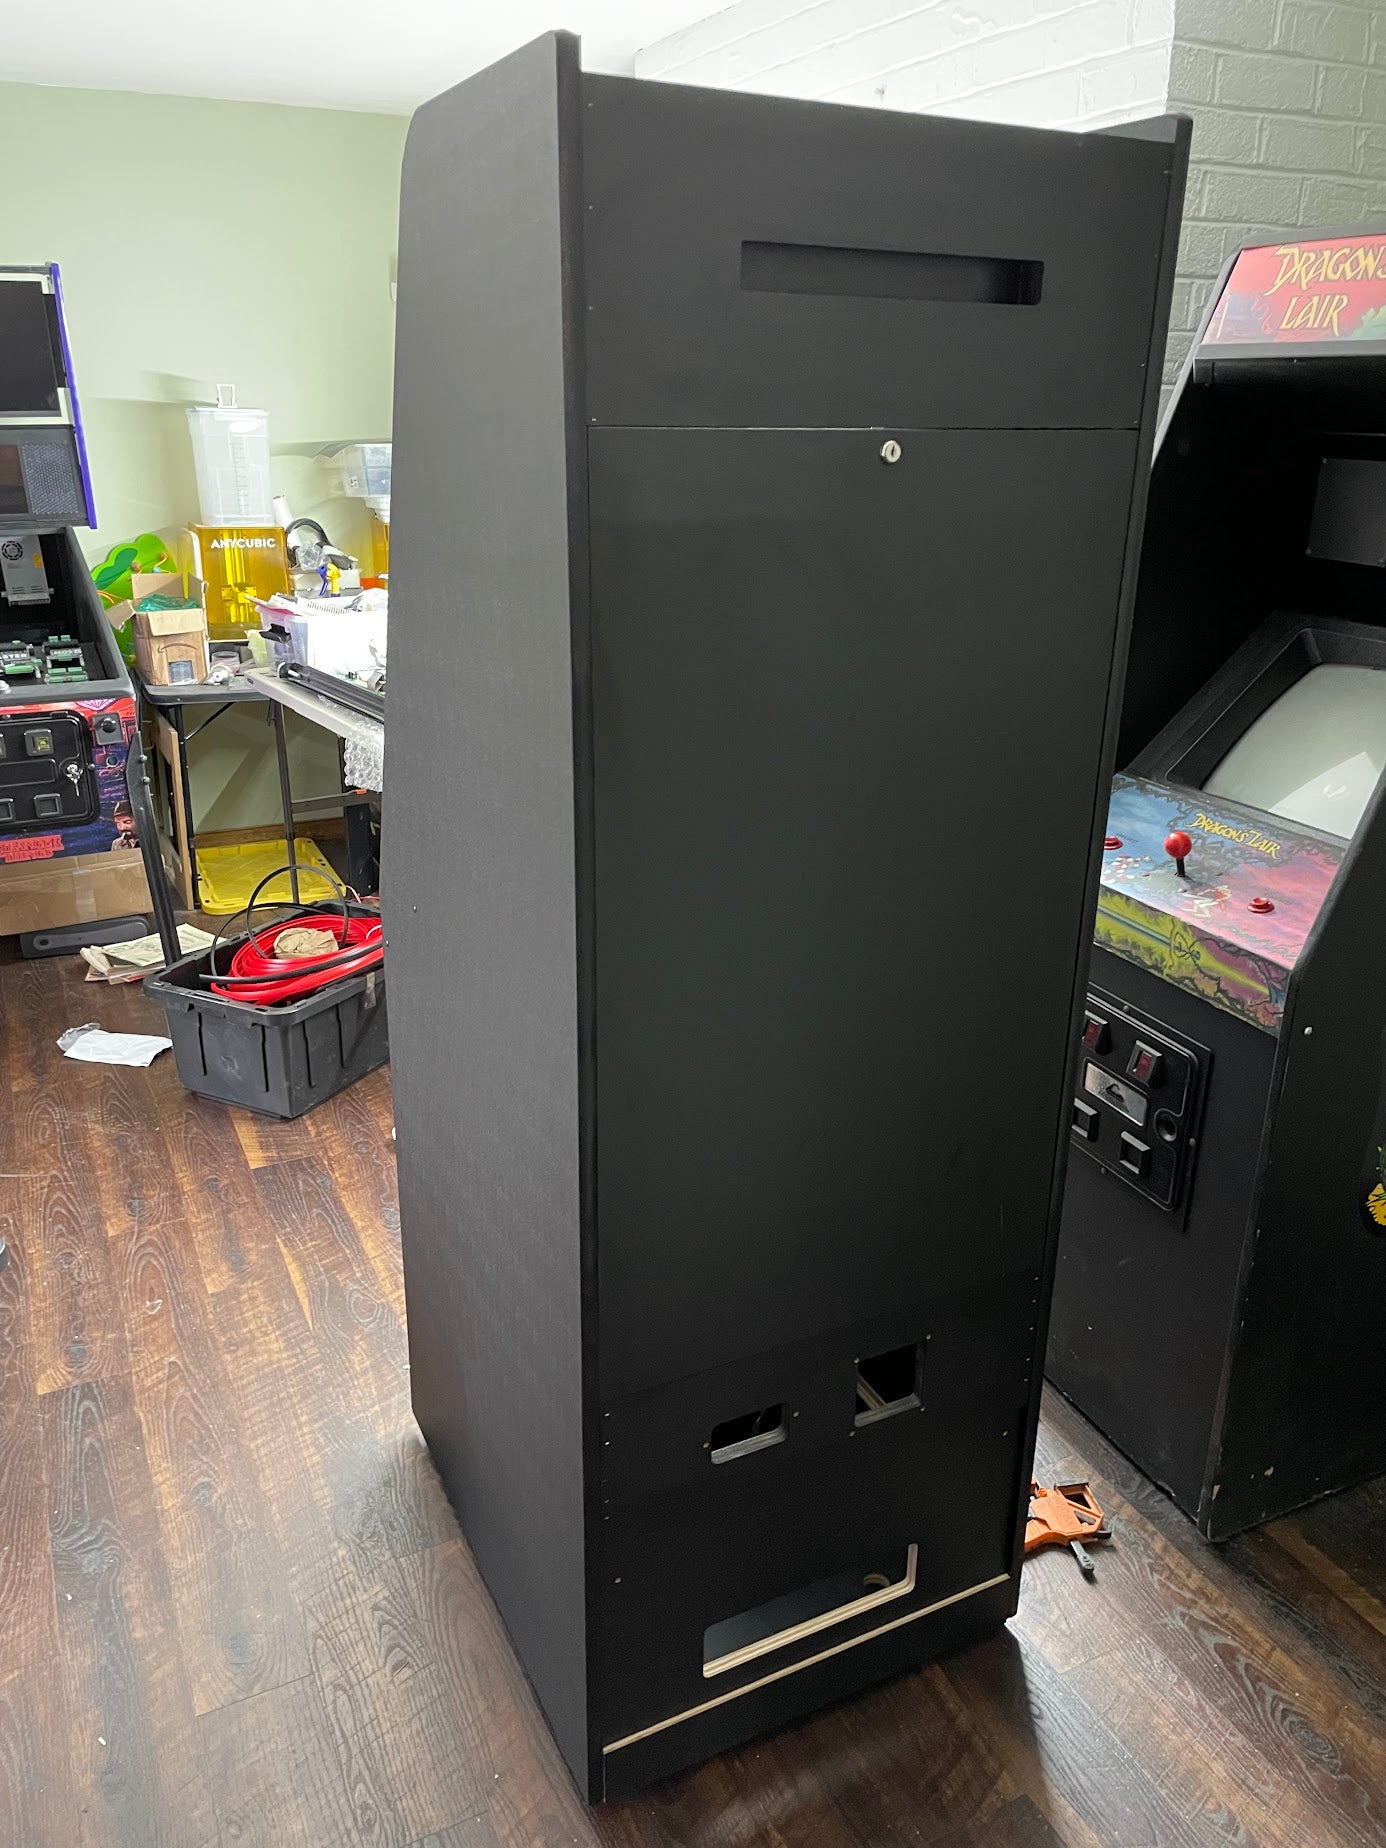 Dragons Lair Reproduction Cabinet